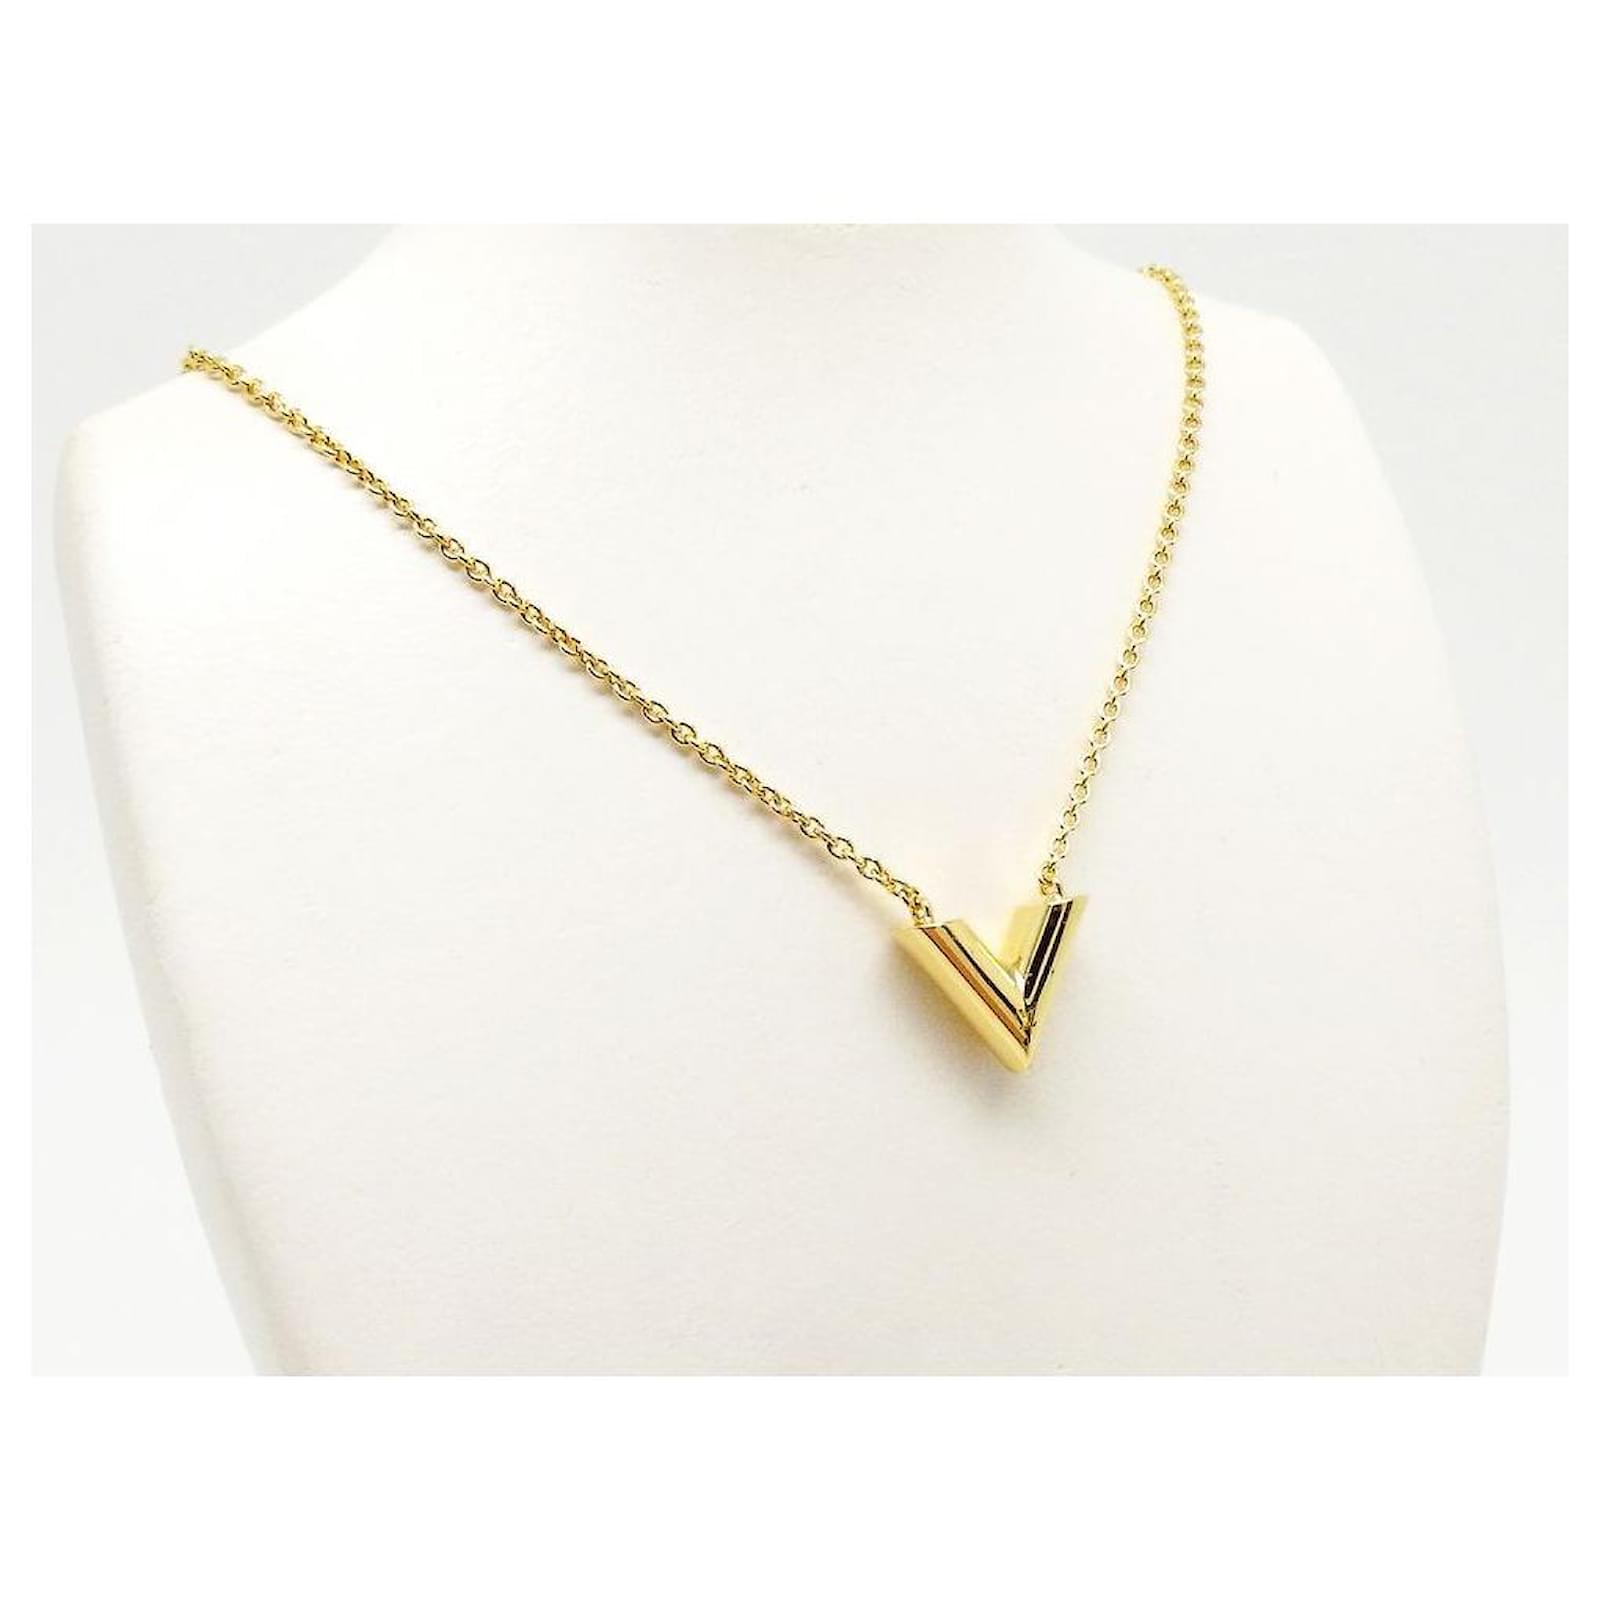 LOUIS VUITTON Necklace M61083 Essential V Gold Plated gold Women Used –